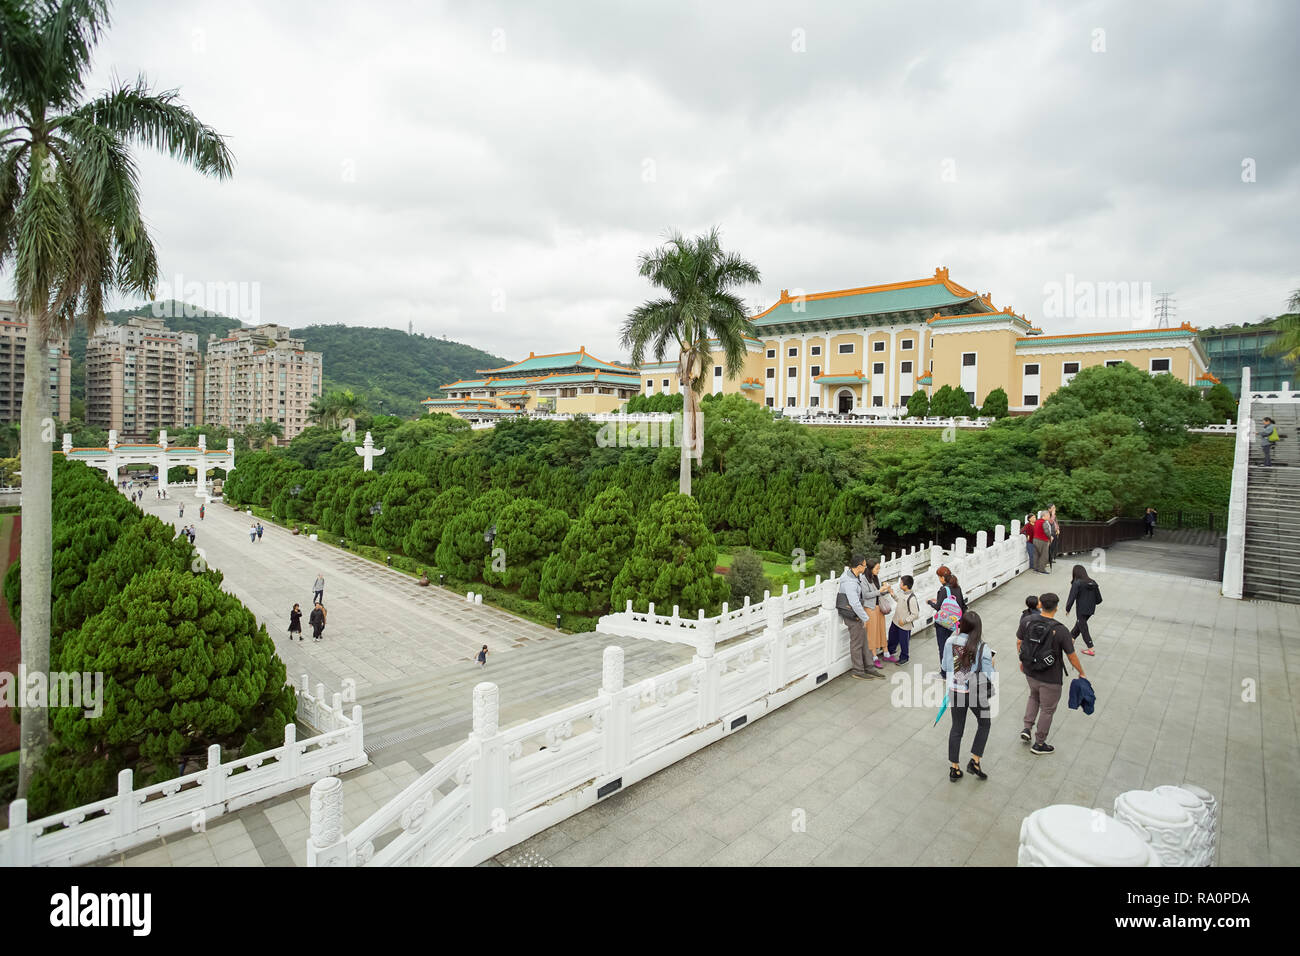 Taipei, Taiwan - November 22, 2018: National Palace Museum in Taipei City, Taiwan. The big collection of 700,000 pieces ancient Chinese imperial artif Stock Photo